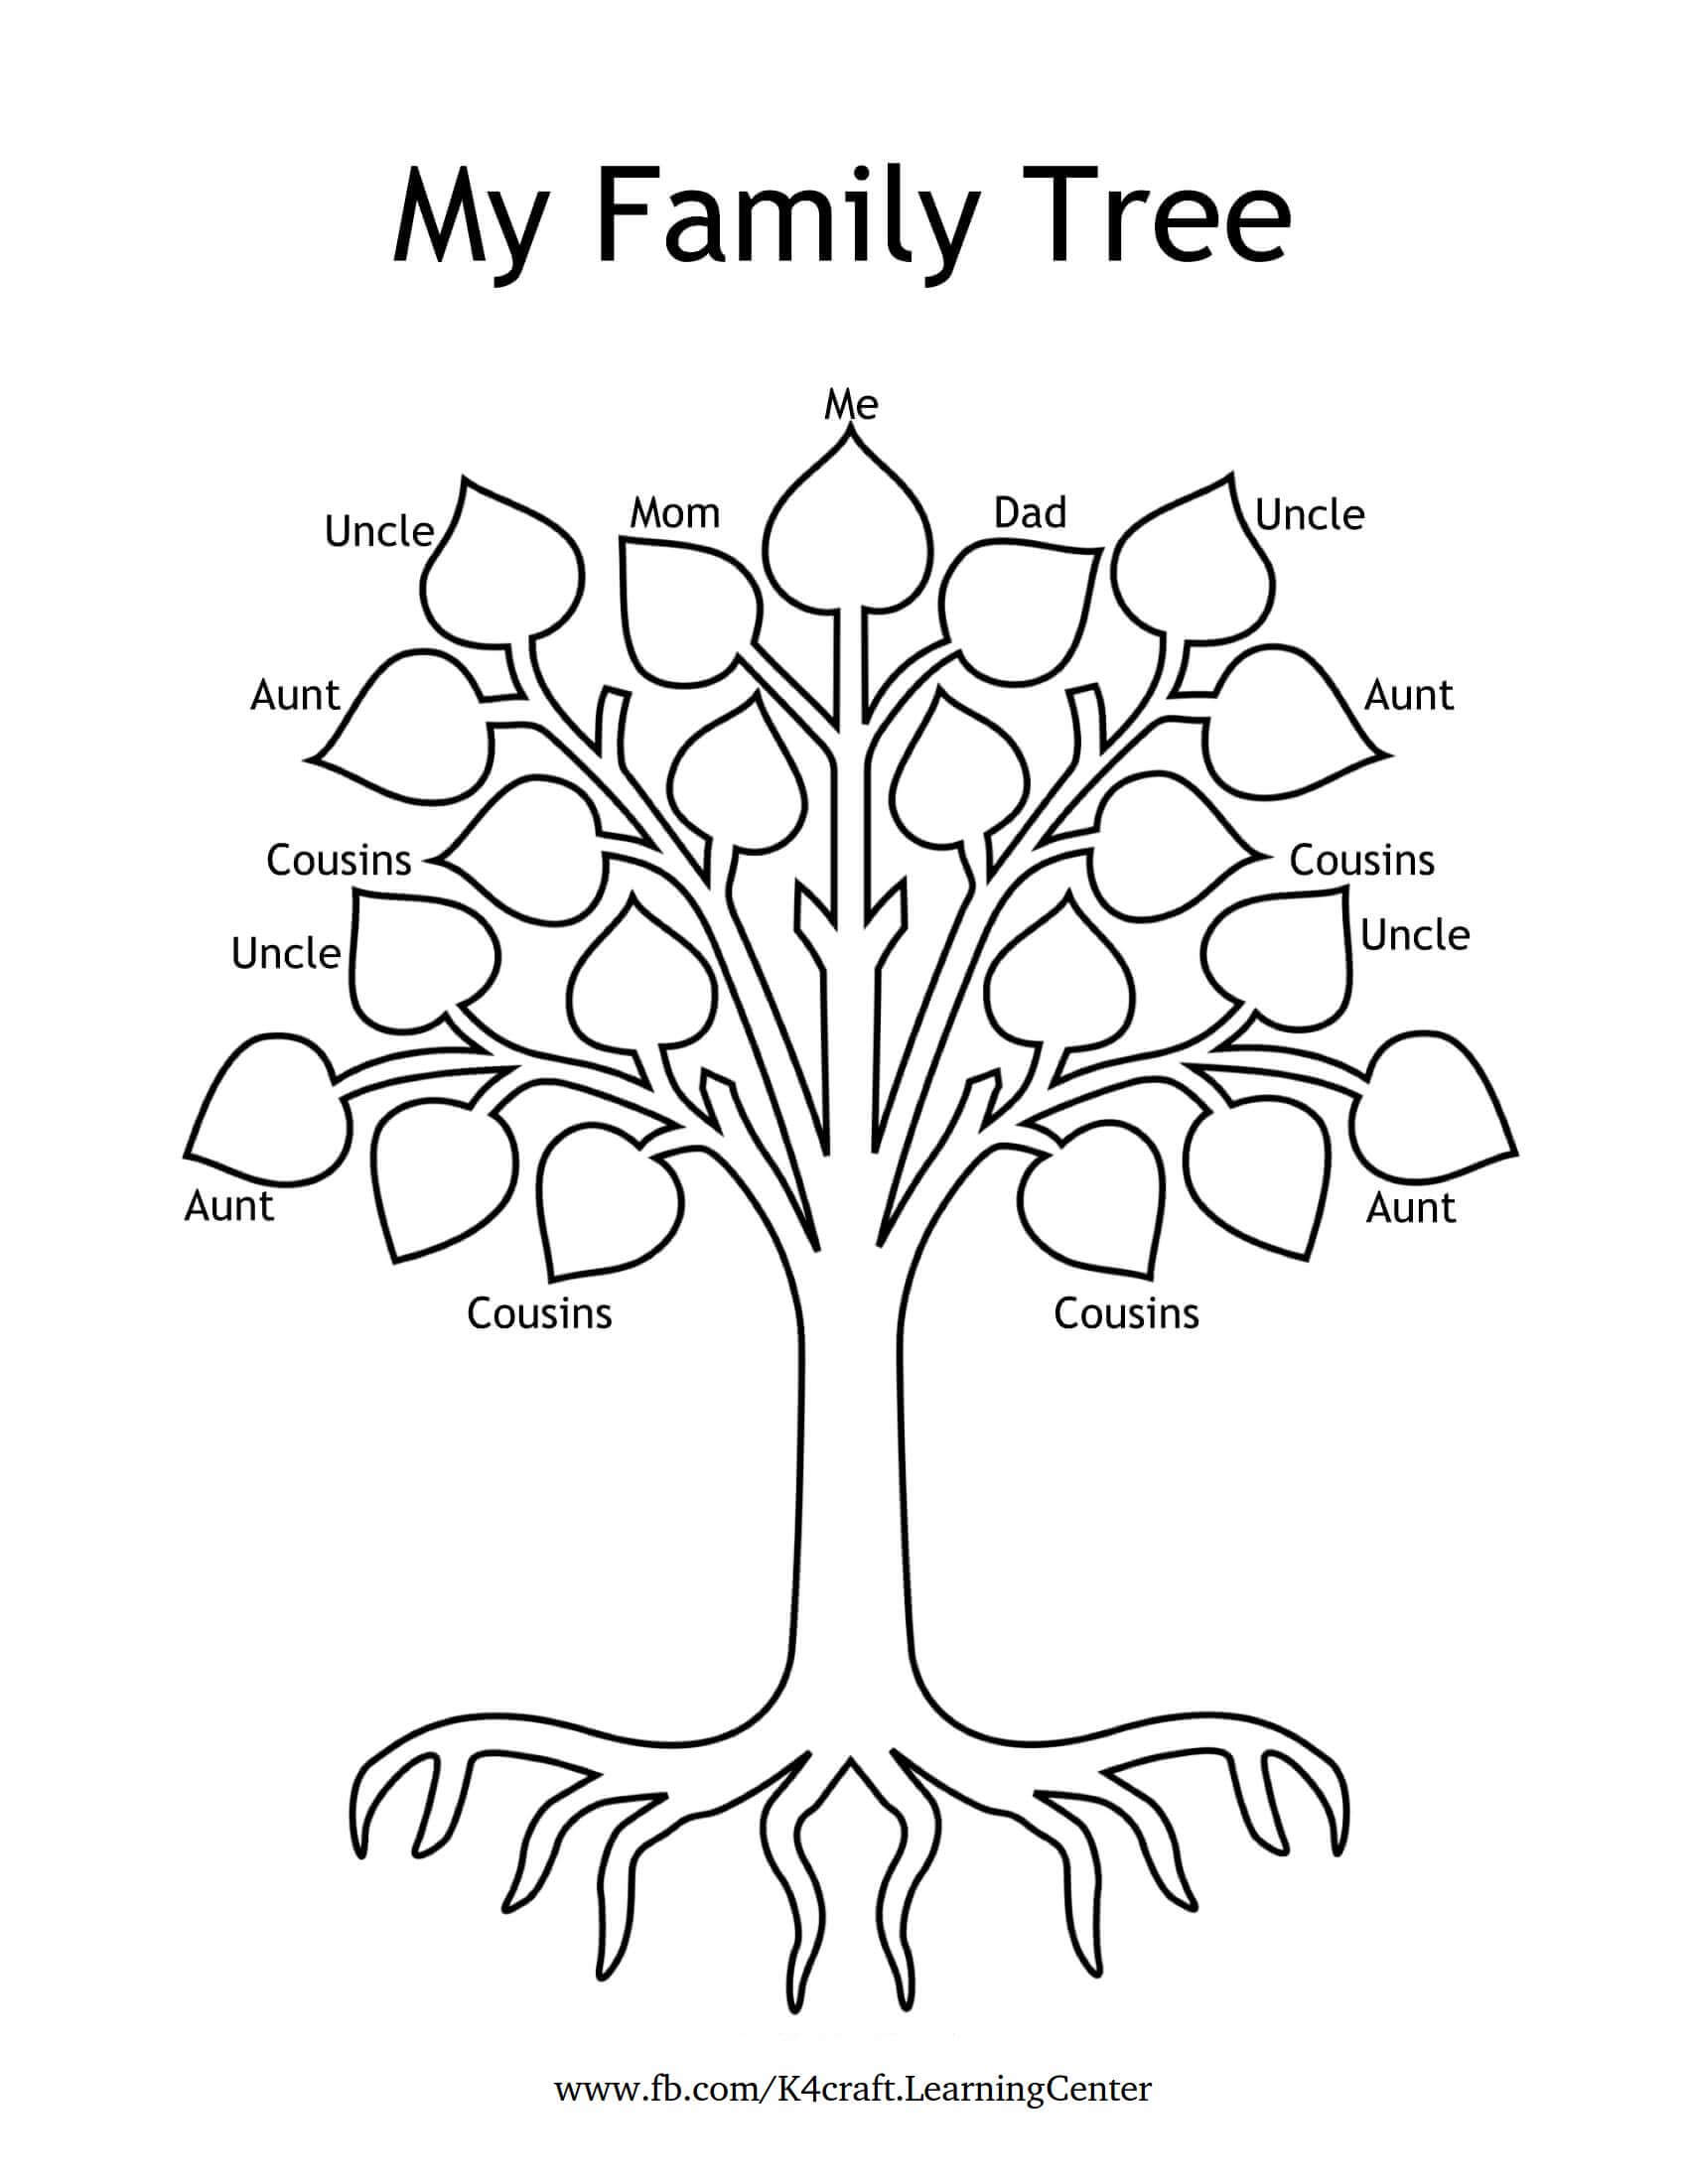 Colorable My Family Tree Template For Kids - Children's Family Tree Formats 